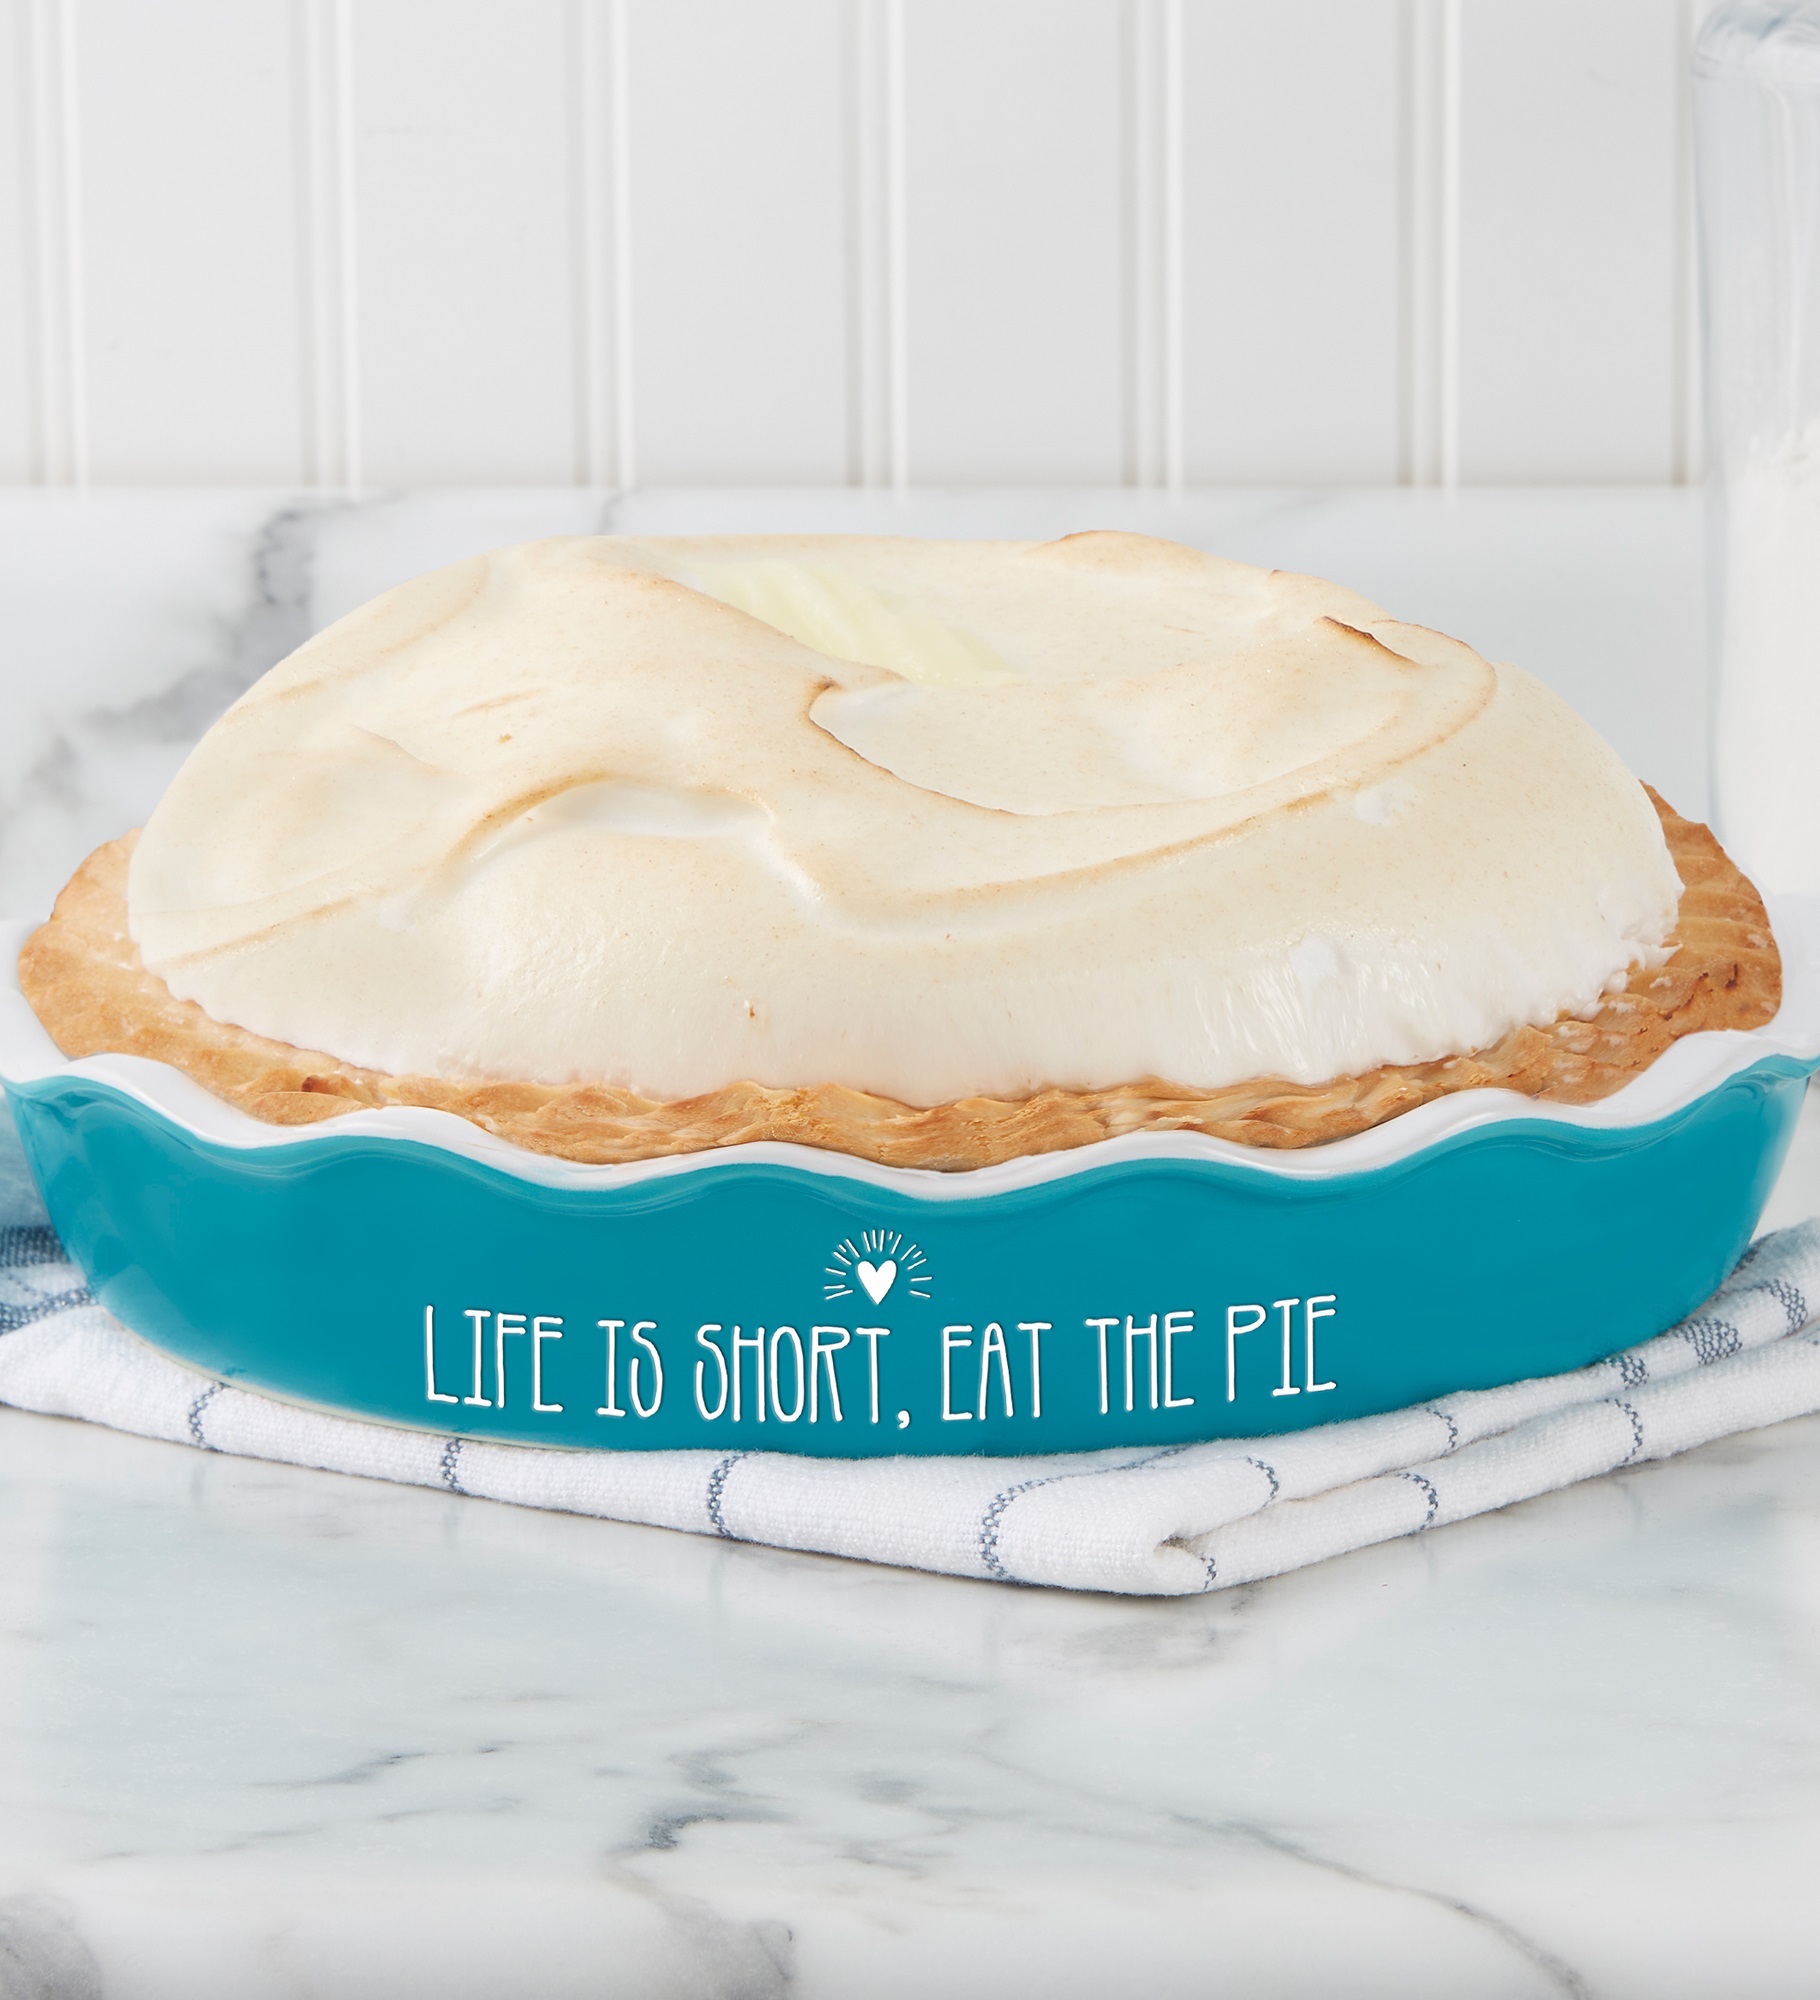 Made with Love Personalized Ceramic Pie Dish